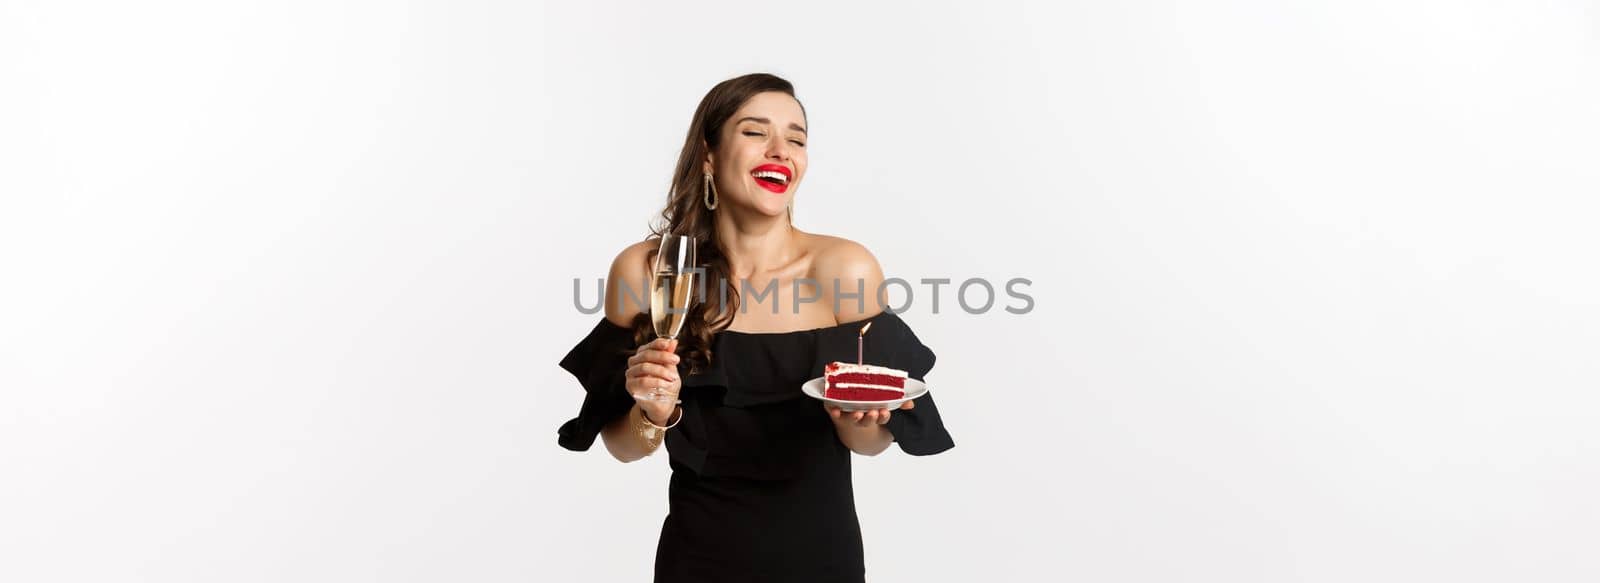 Celebration and party concept. Fashionable woman holding birthday cake with candle and drinking champagne, laughing happy, standing over white background.